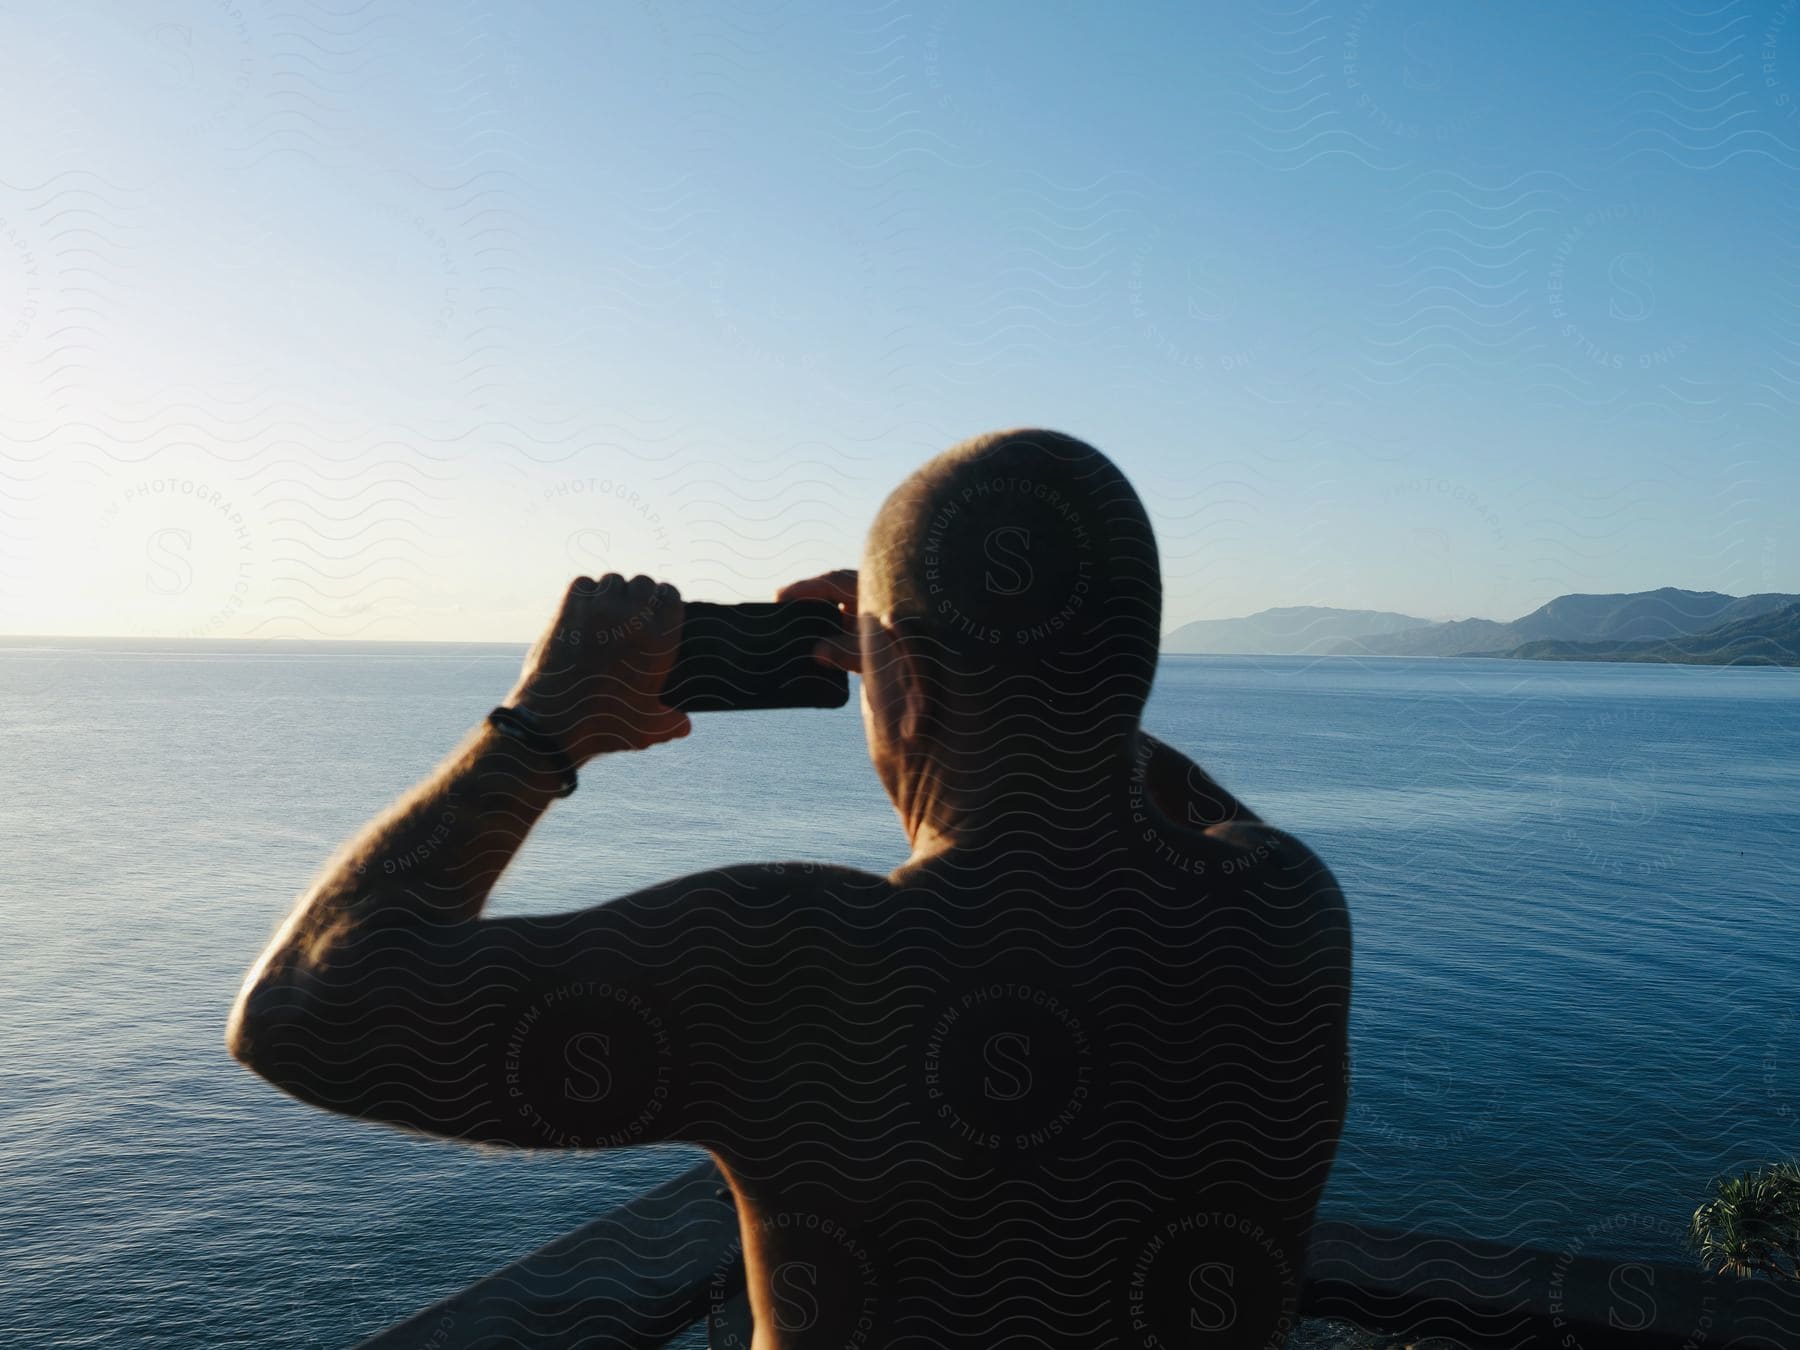 A shirtless man standing on a deck above the water taking a photo with his cell phone camera